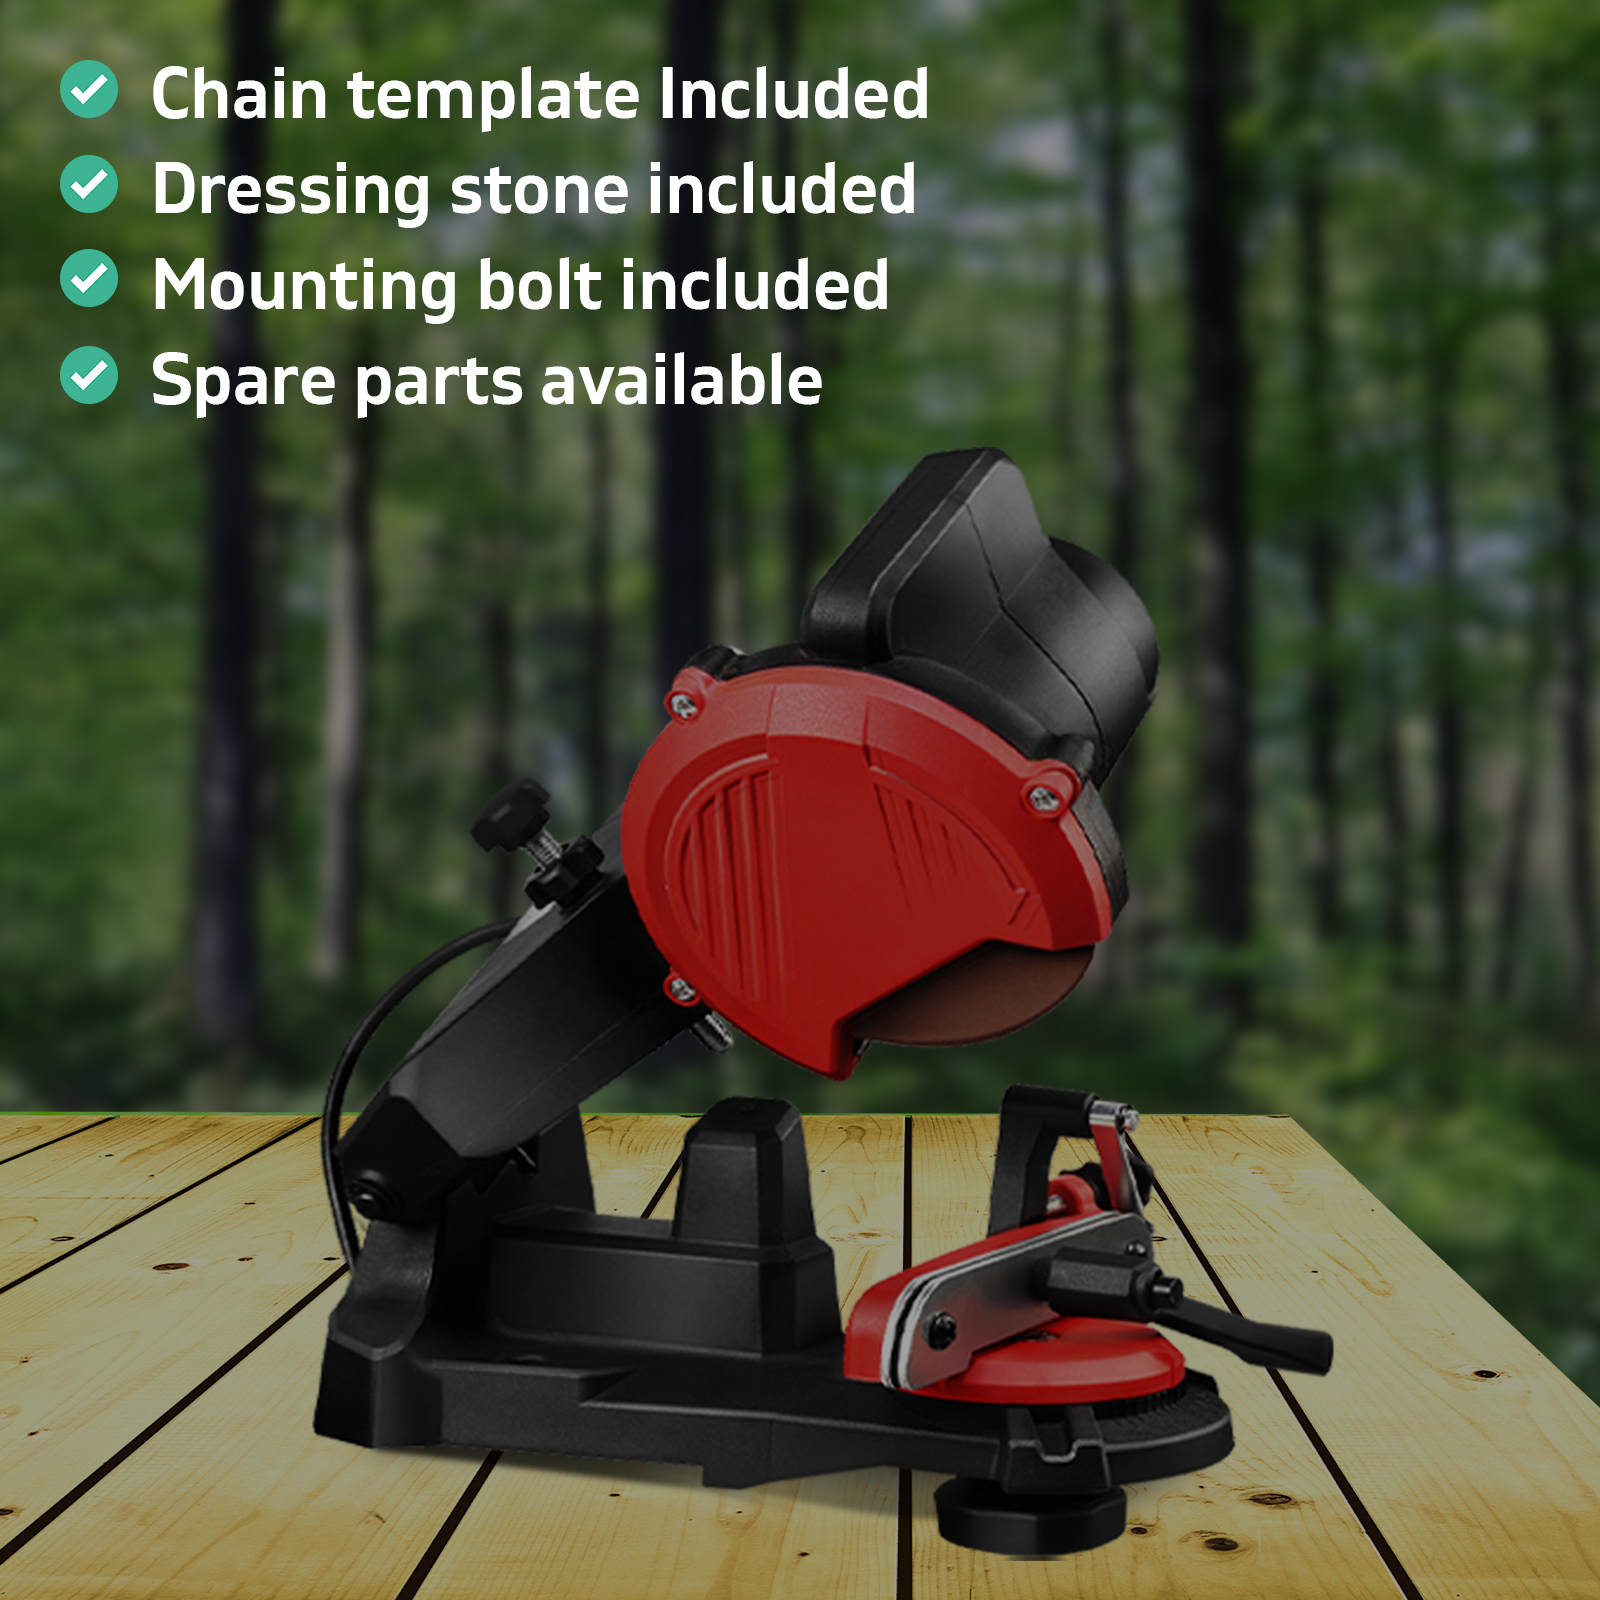 85W Chainsaw Sharpener Chain Saw Electric Grinder Bench Tool Aluminum Body